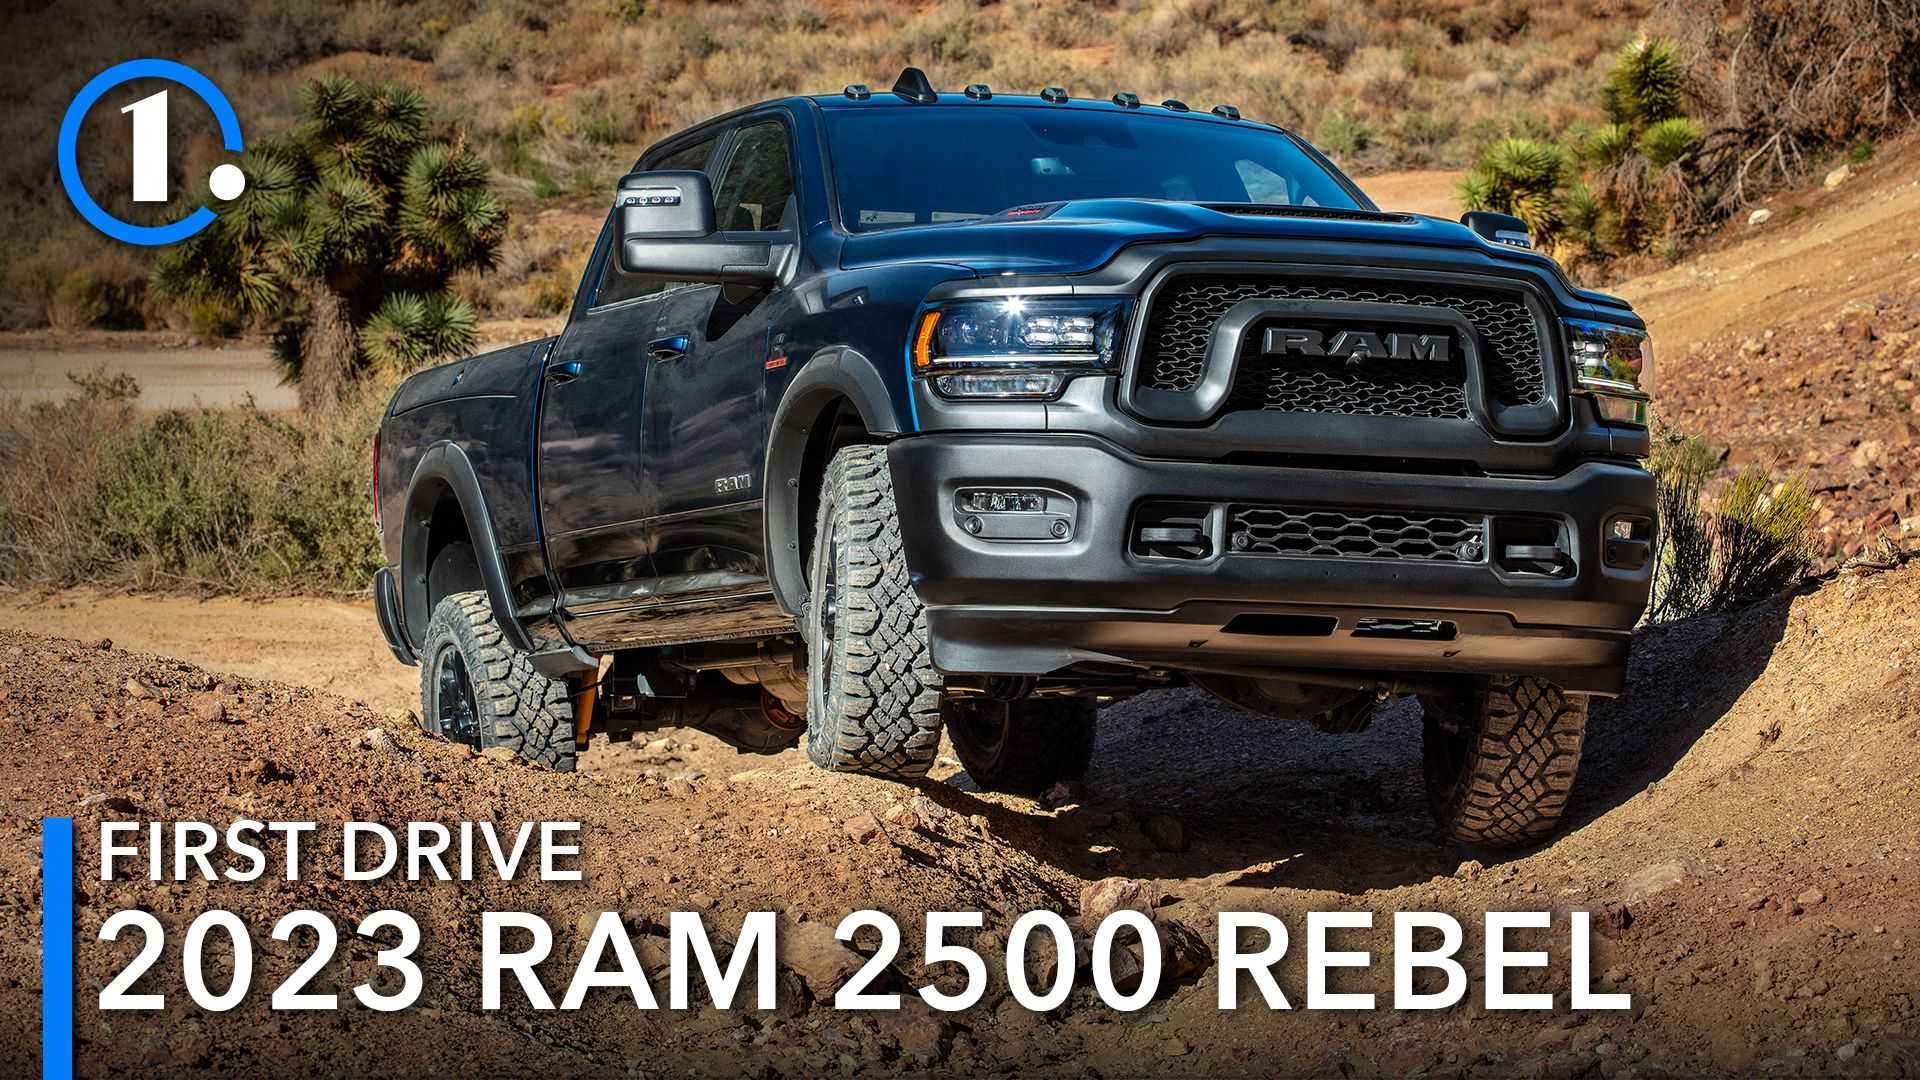 2023 Ram 2500 Rebel First Drive Review: Torque Dirty To Me